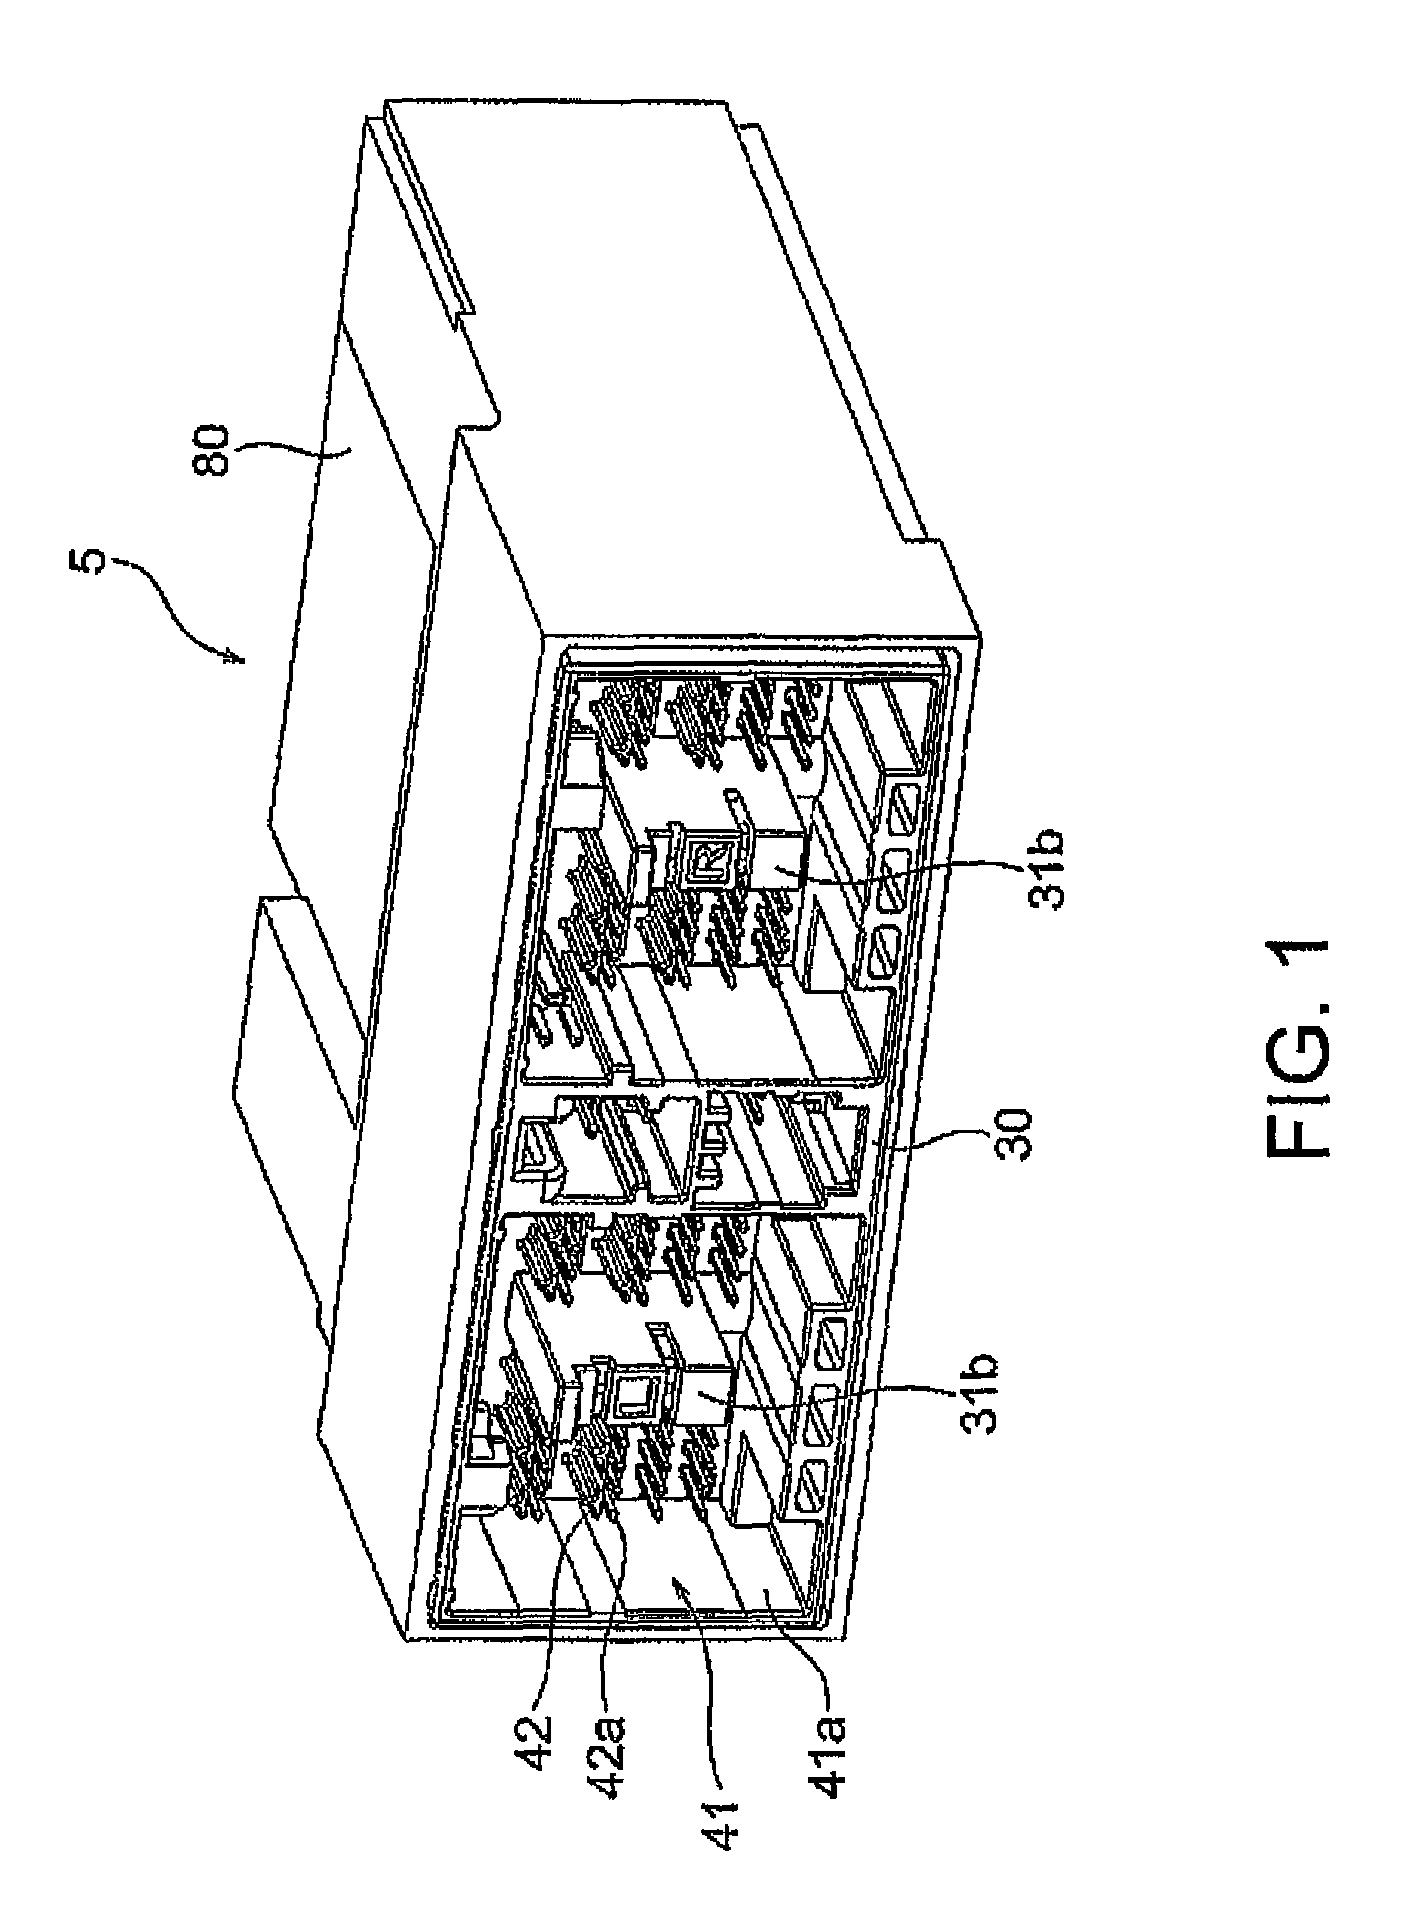 Connector for mounting electrolytic capacitor onto board and electronic circuit apparatus